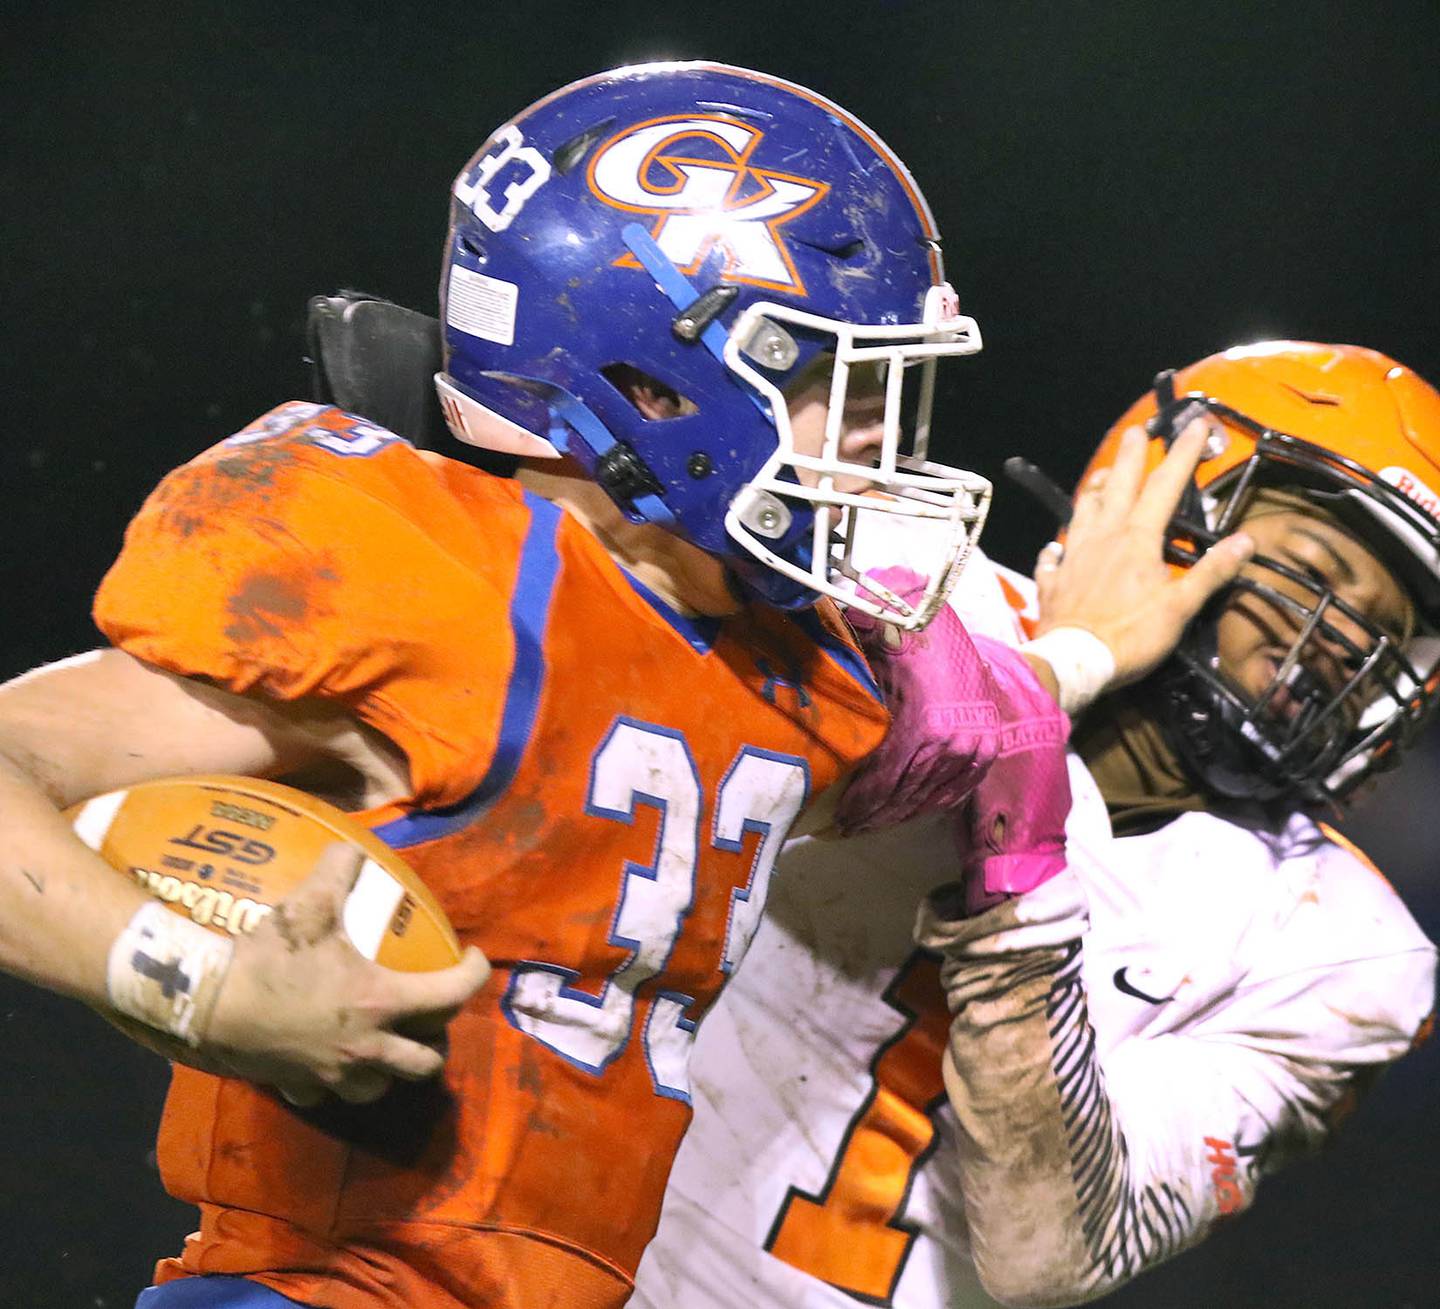 Genoa-Kingston's Chase Engel stiff arms Bogan's Kavon Garland Friday, Oct. 29, 2021, in Genoa during their IHSA Class 4A playoff opener.